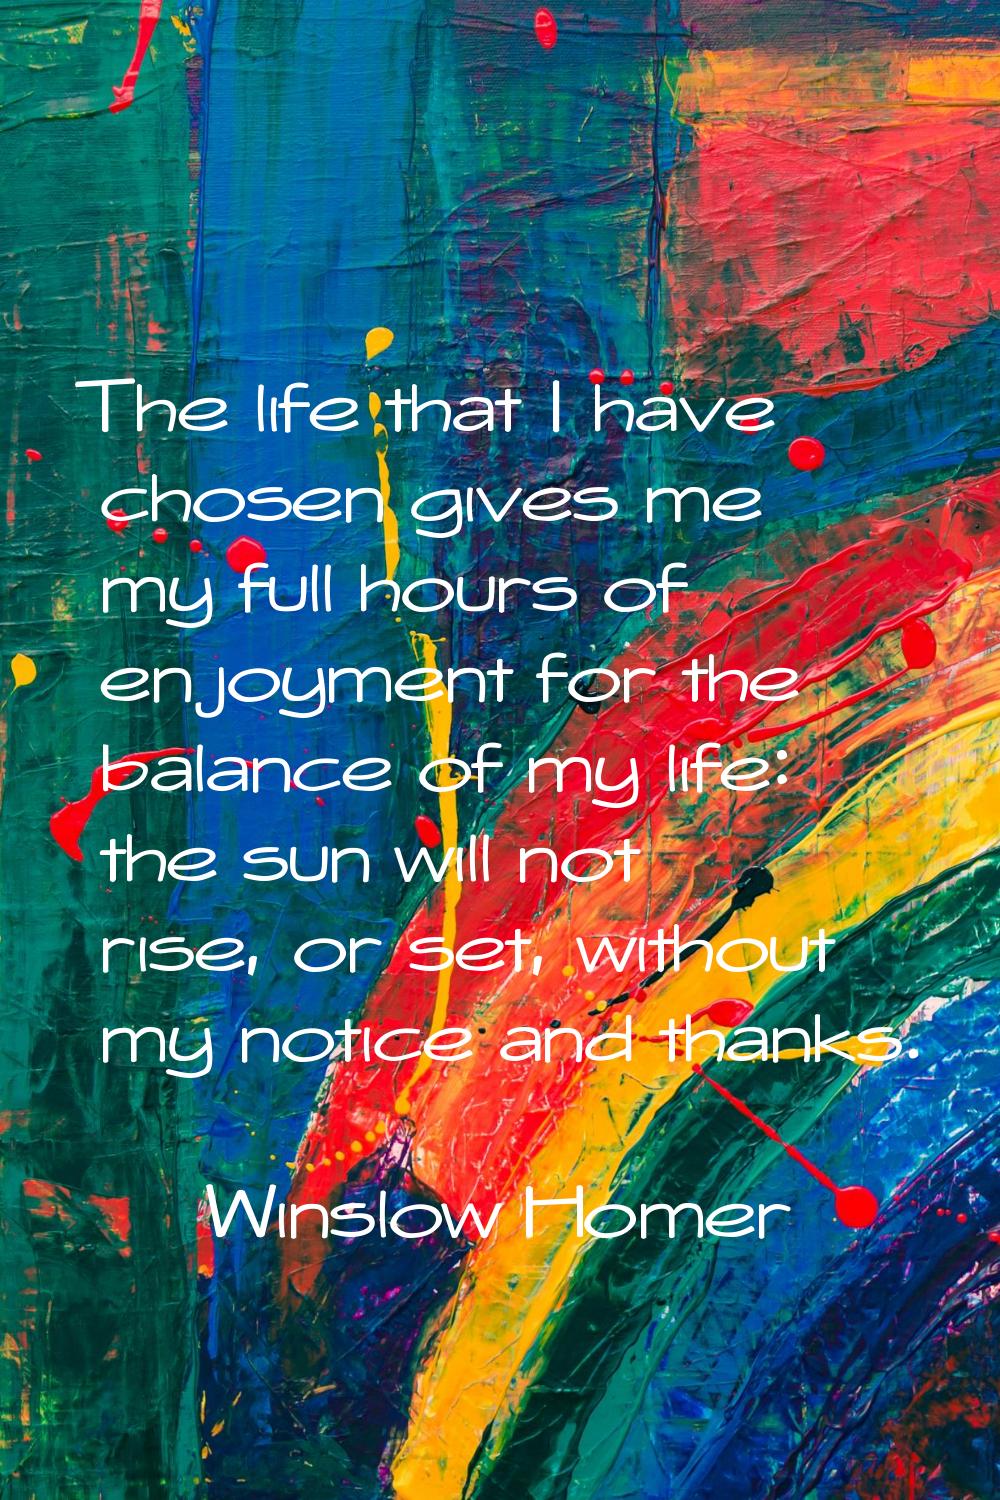 The life that I have chosen gives me my full hours of enjoyment for the balance of my life: the sun